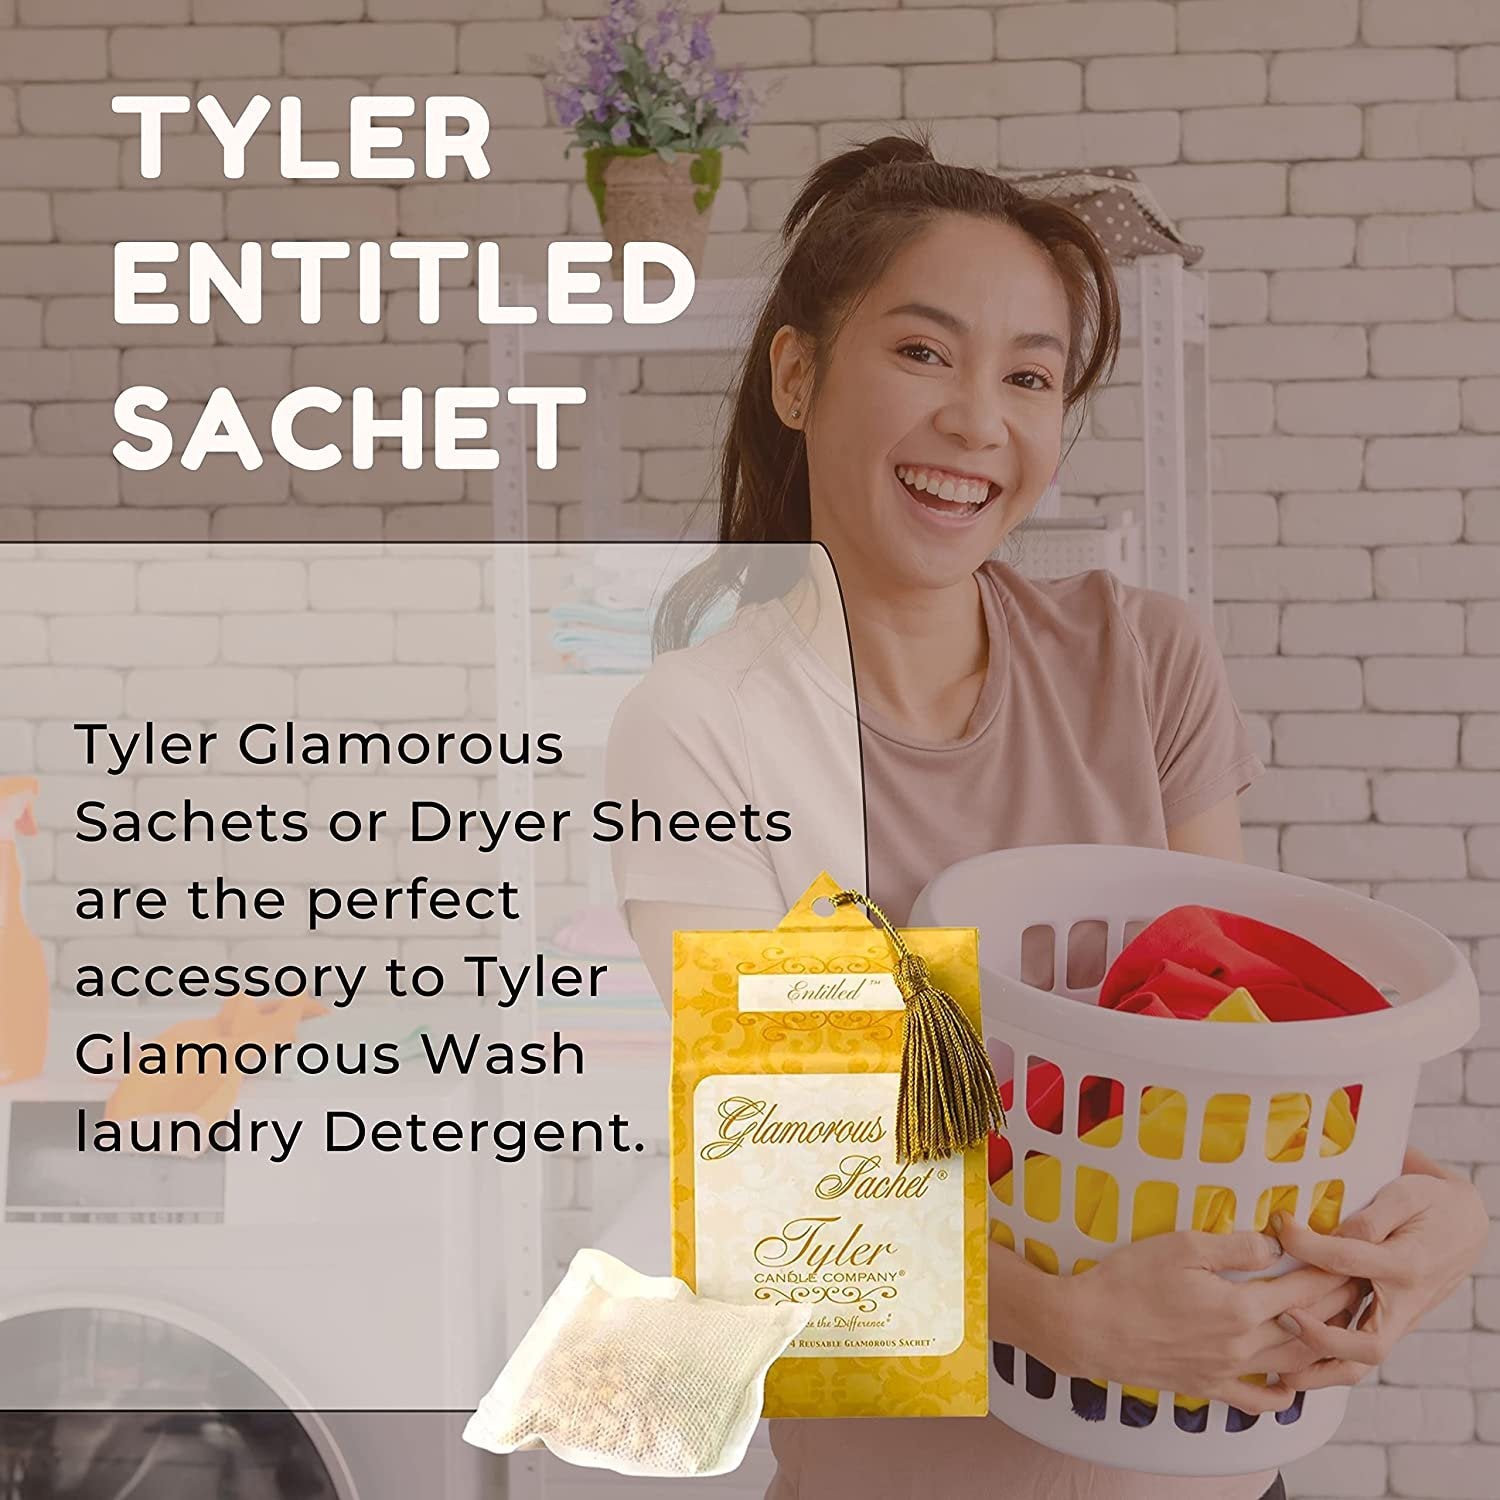 Tyler Candle Company Entitled Dryer Sheet Sachets - Glamorous Reusable Dryer Sheets - Sachets for Drawers and Closets - 2 Pack of 4 Sachets, Dryer, Home, or Personal Sachet, with Bonus Key Chain